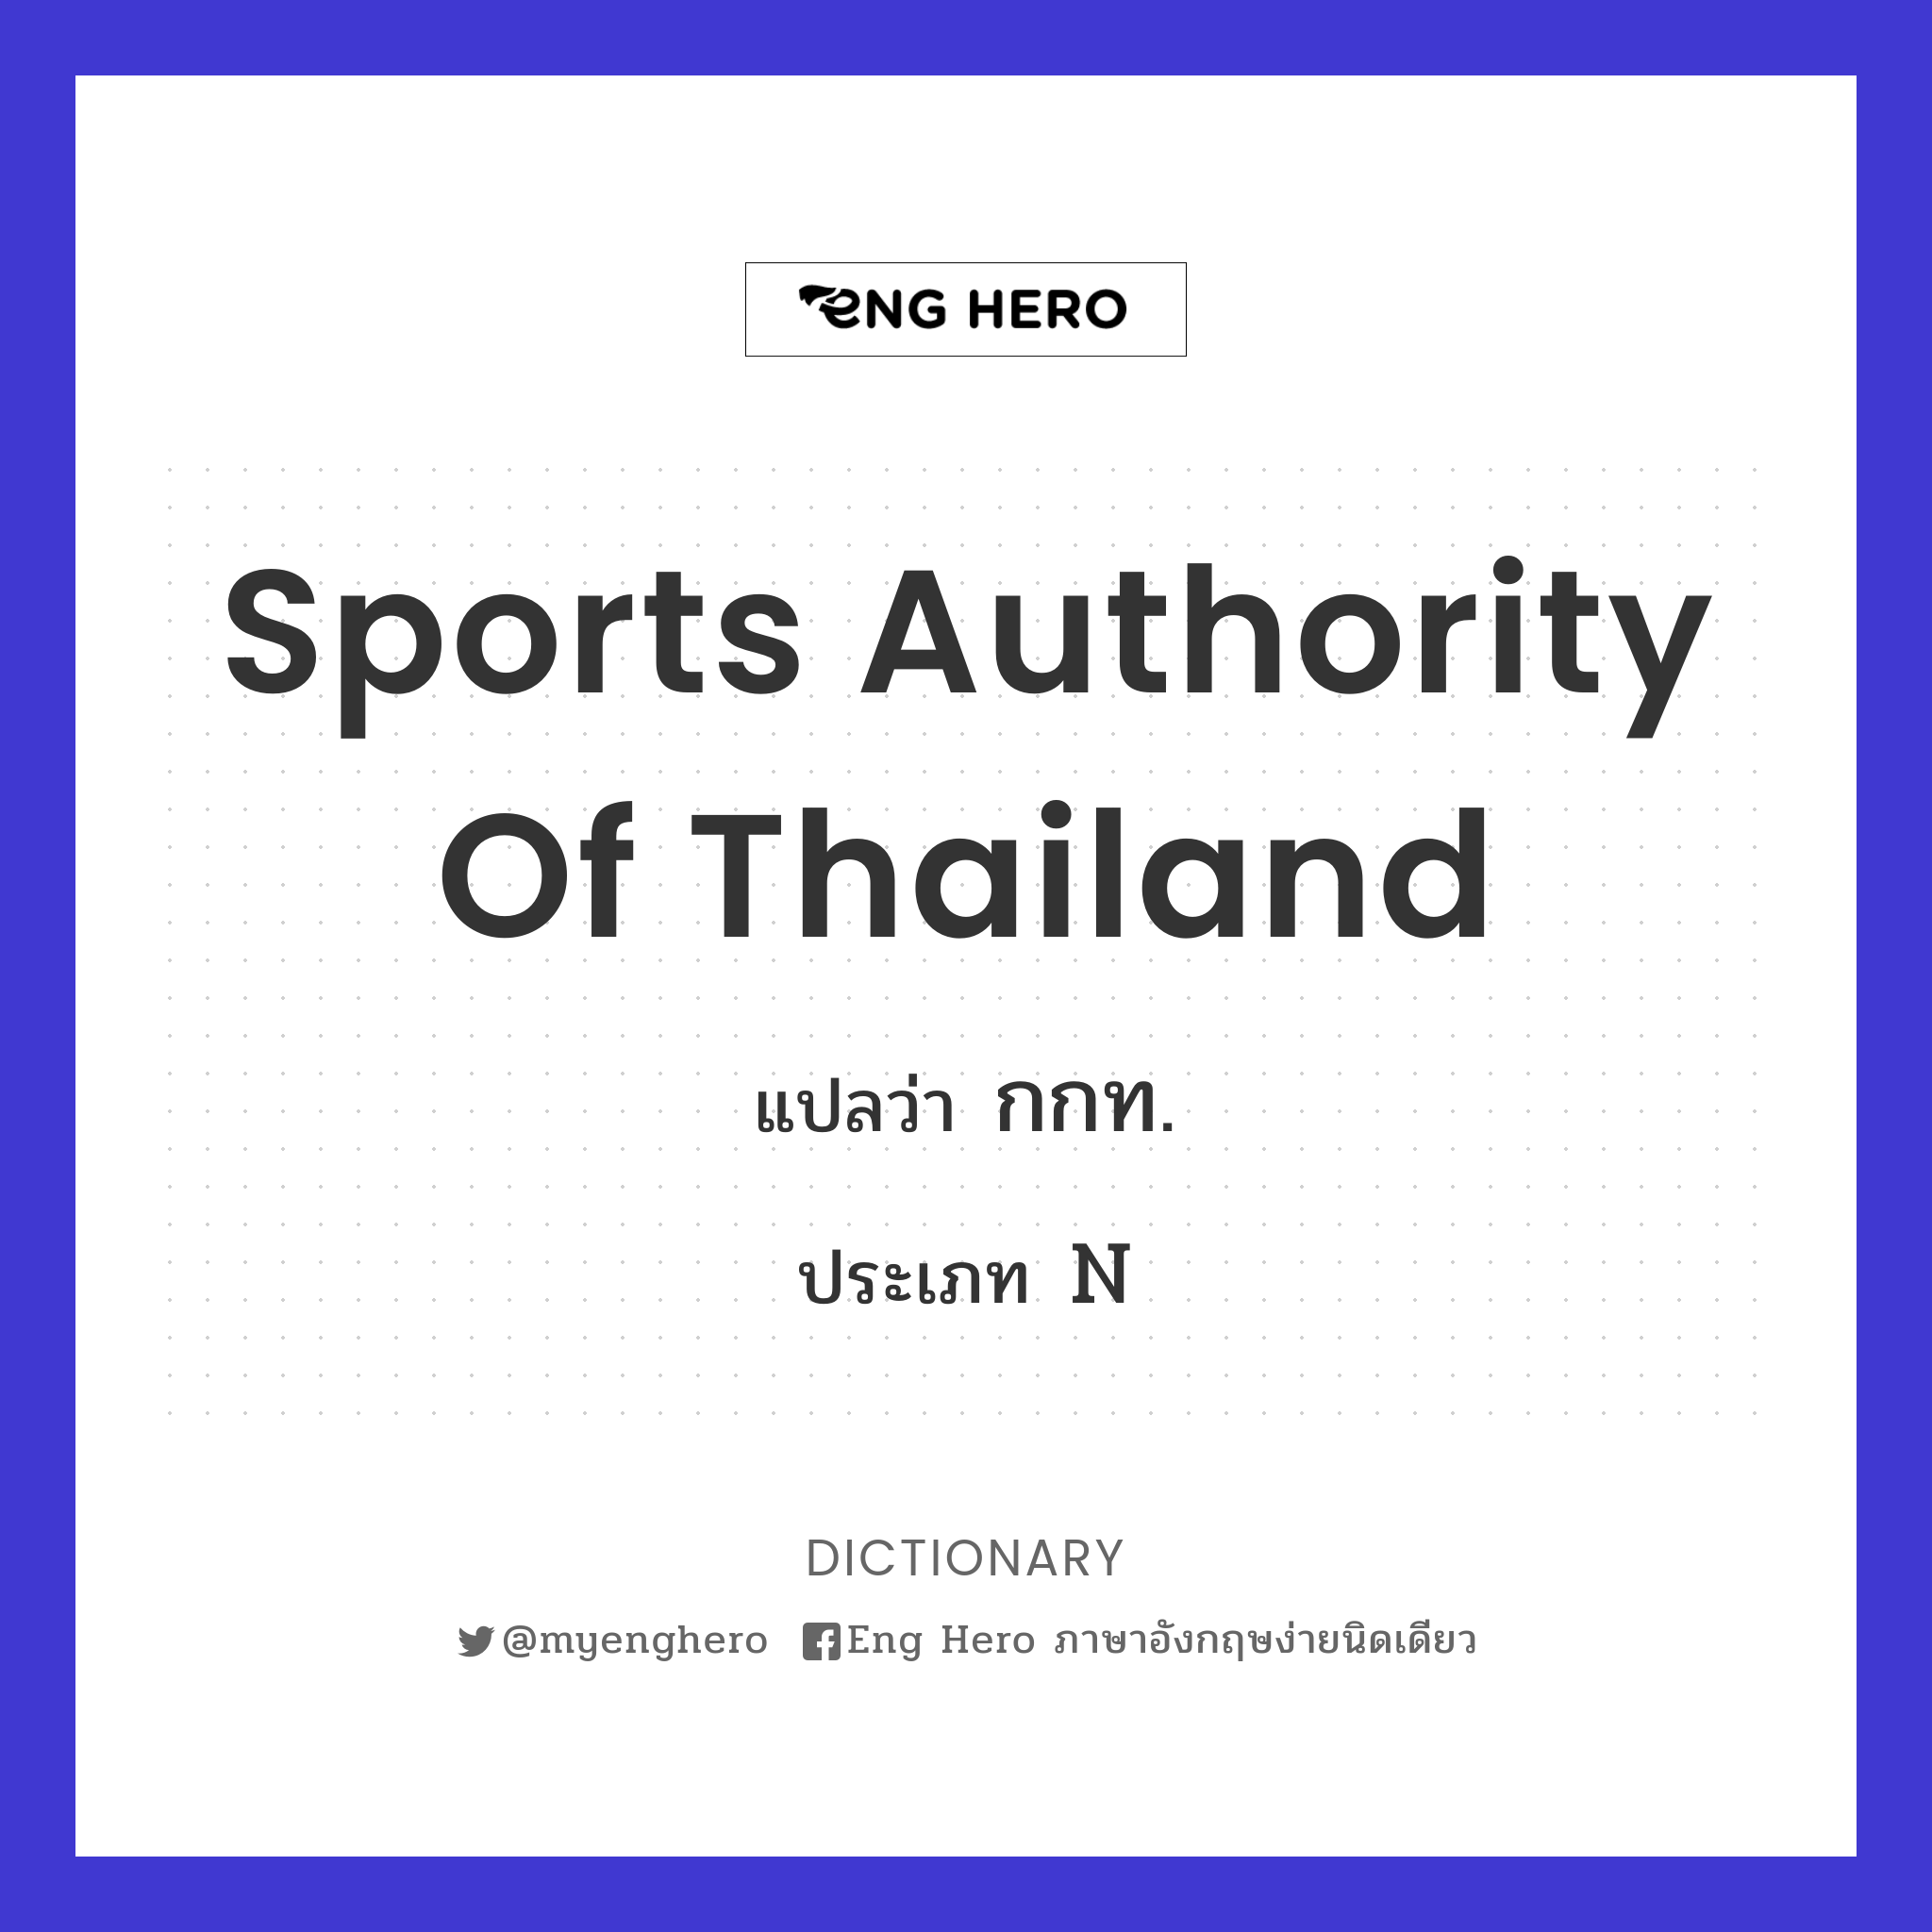 Sports Authority of Thailand